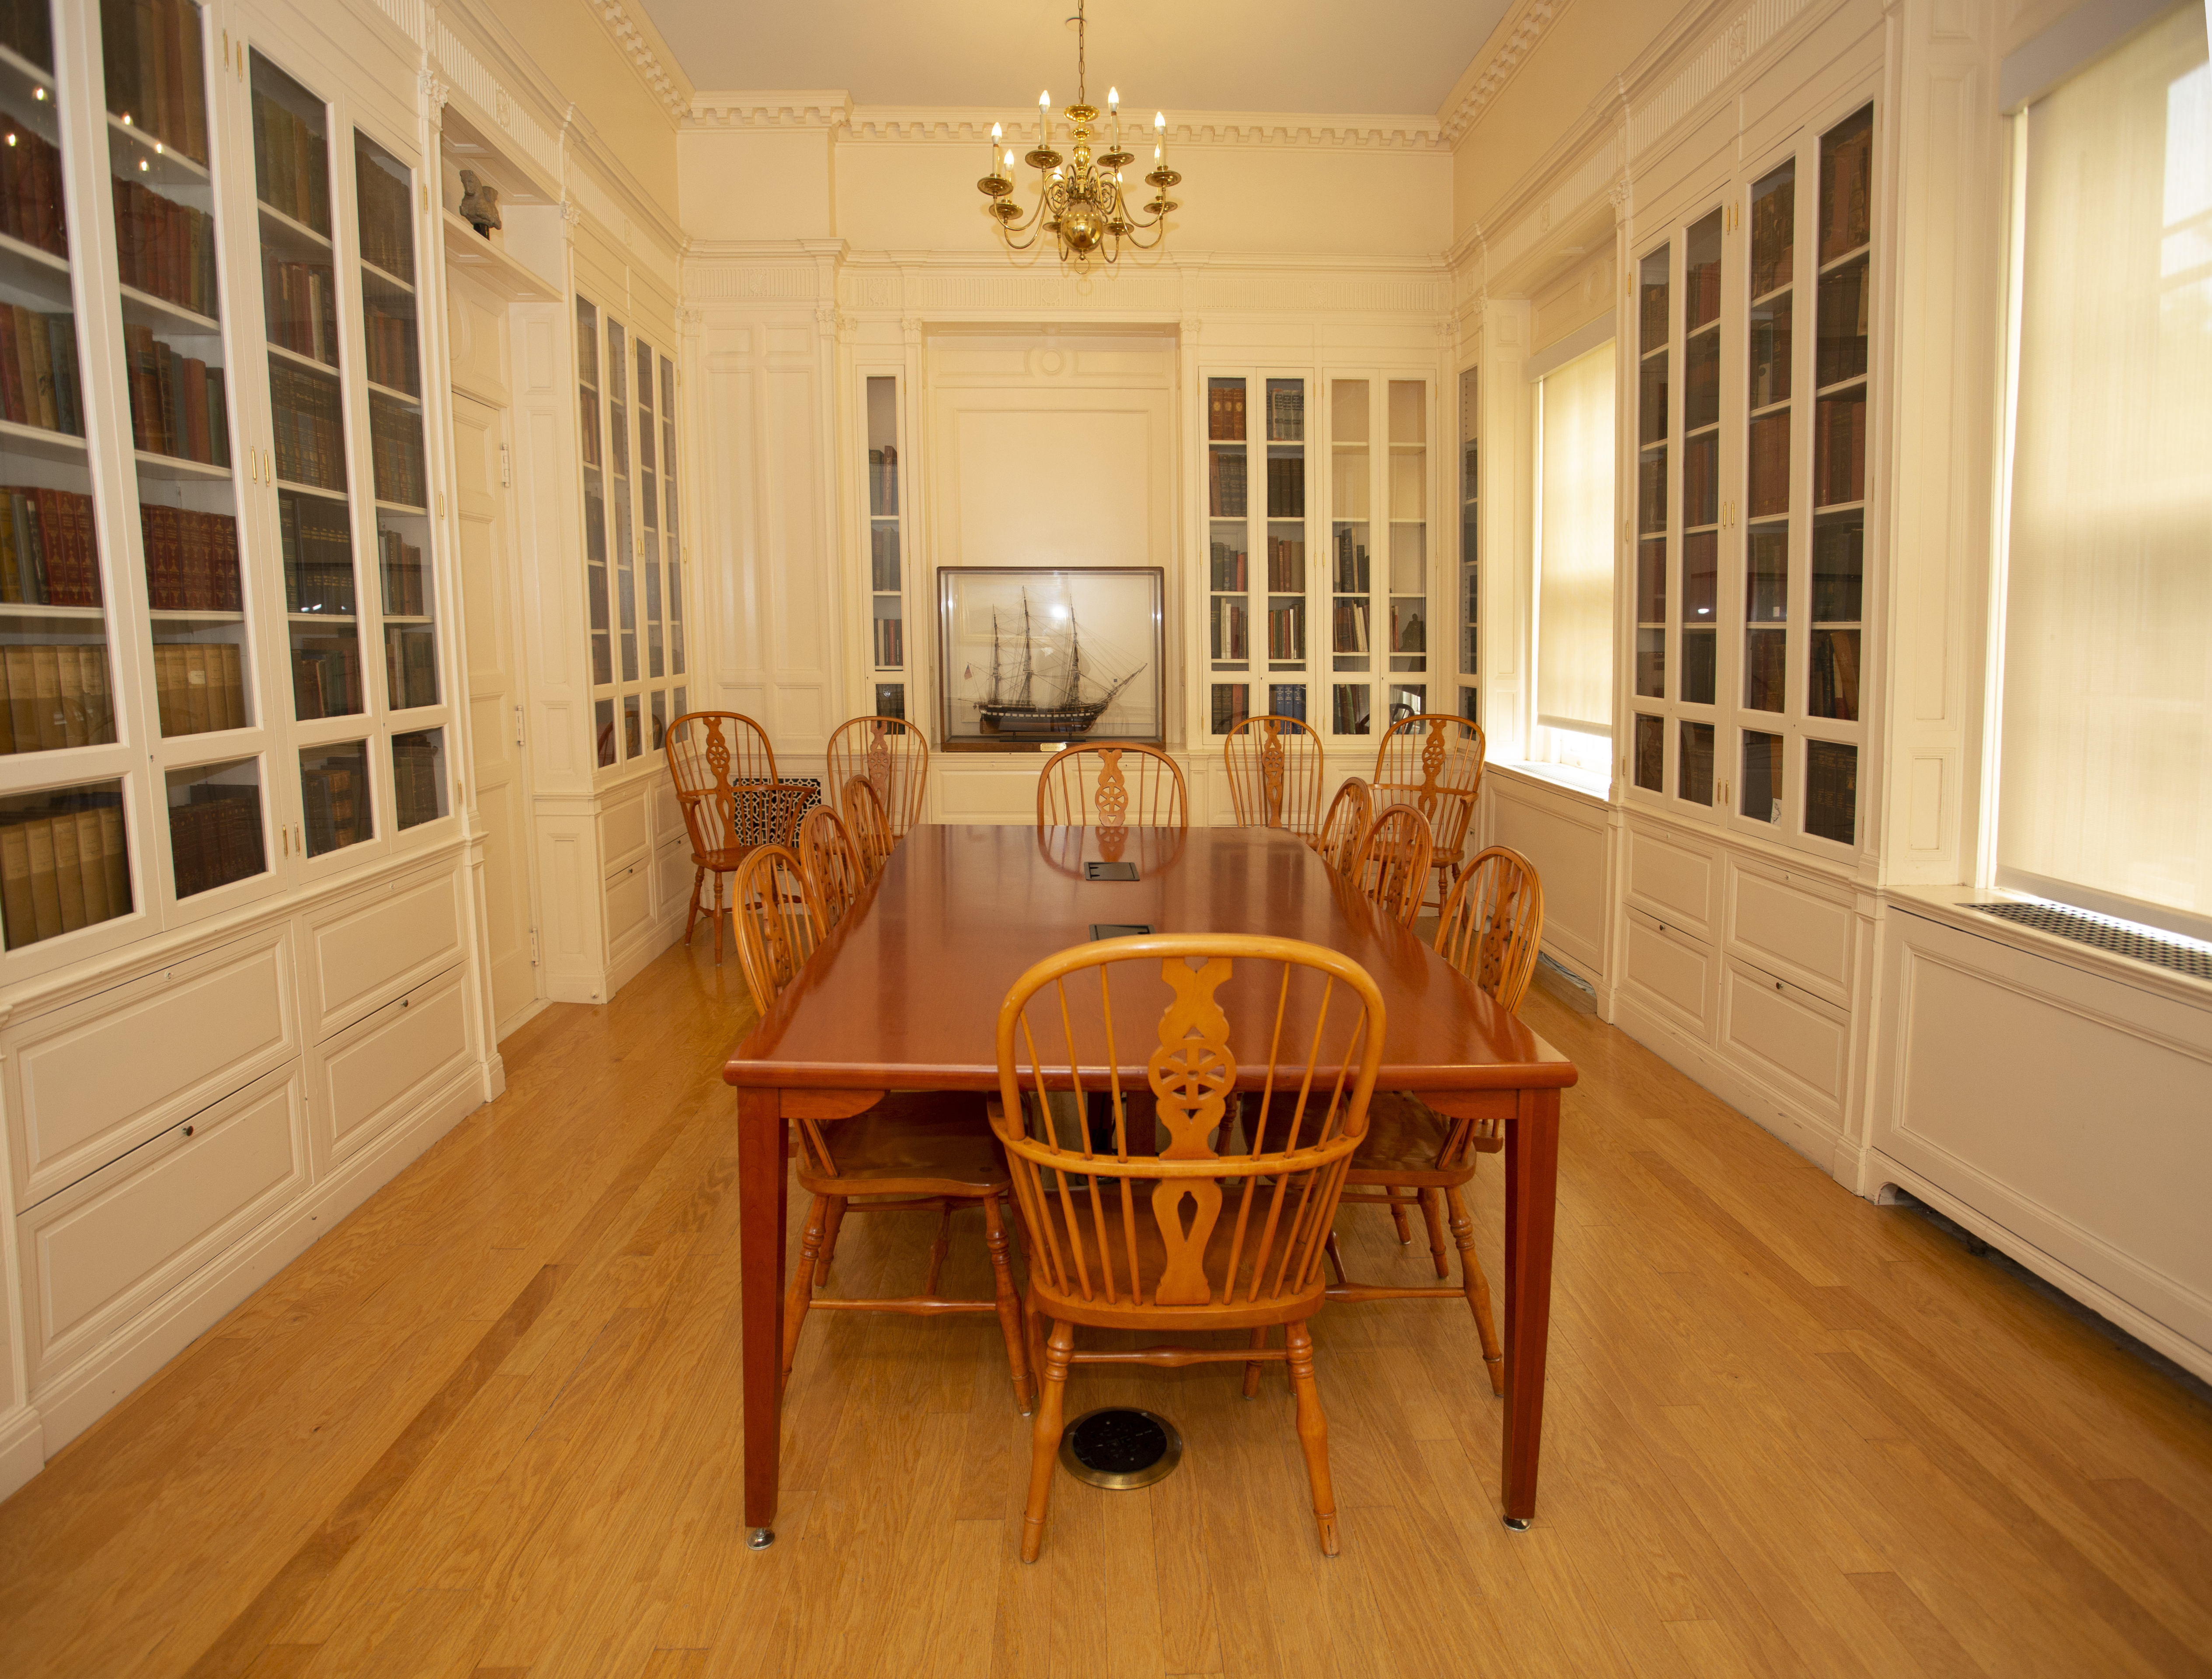 Annie B. Jennings Room showing a hardwood floor, enclosed book shelving, and a long rectangular wood table with chairs 